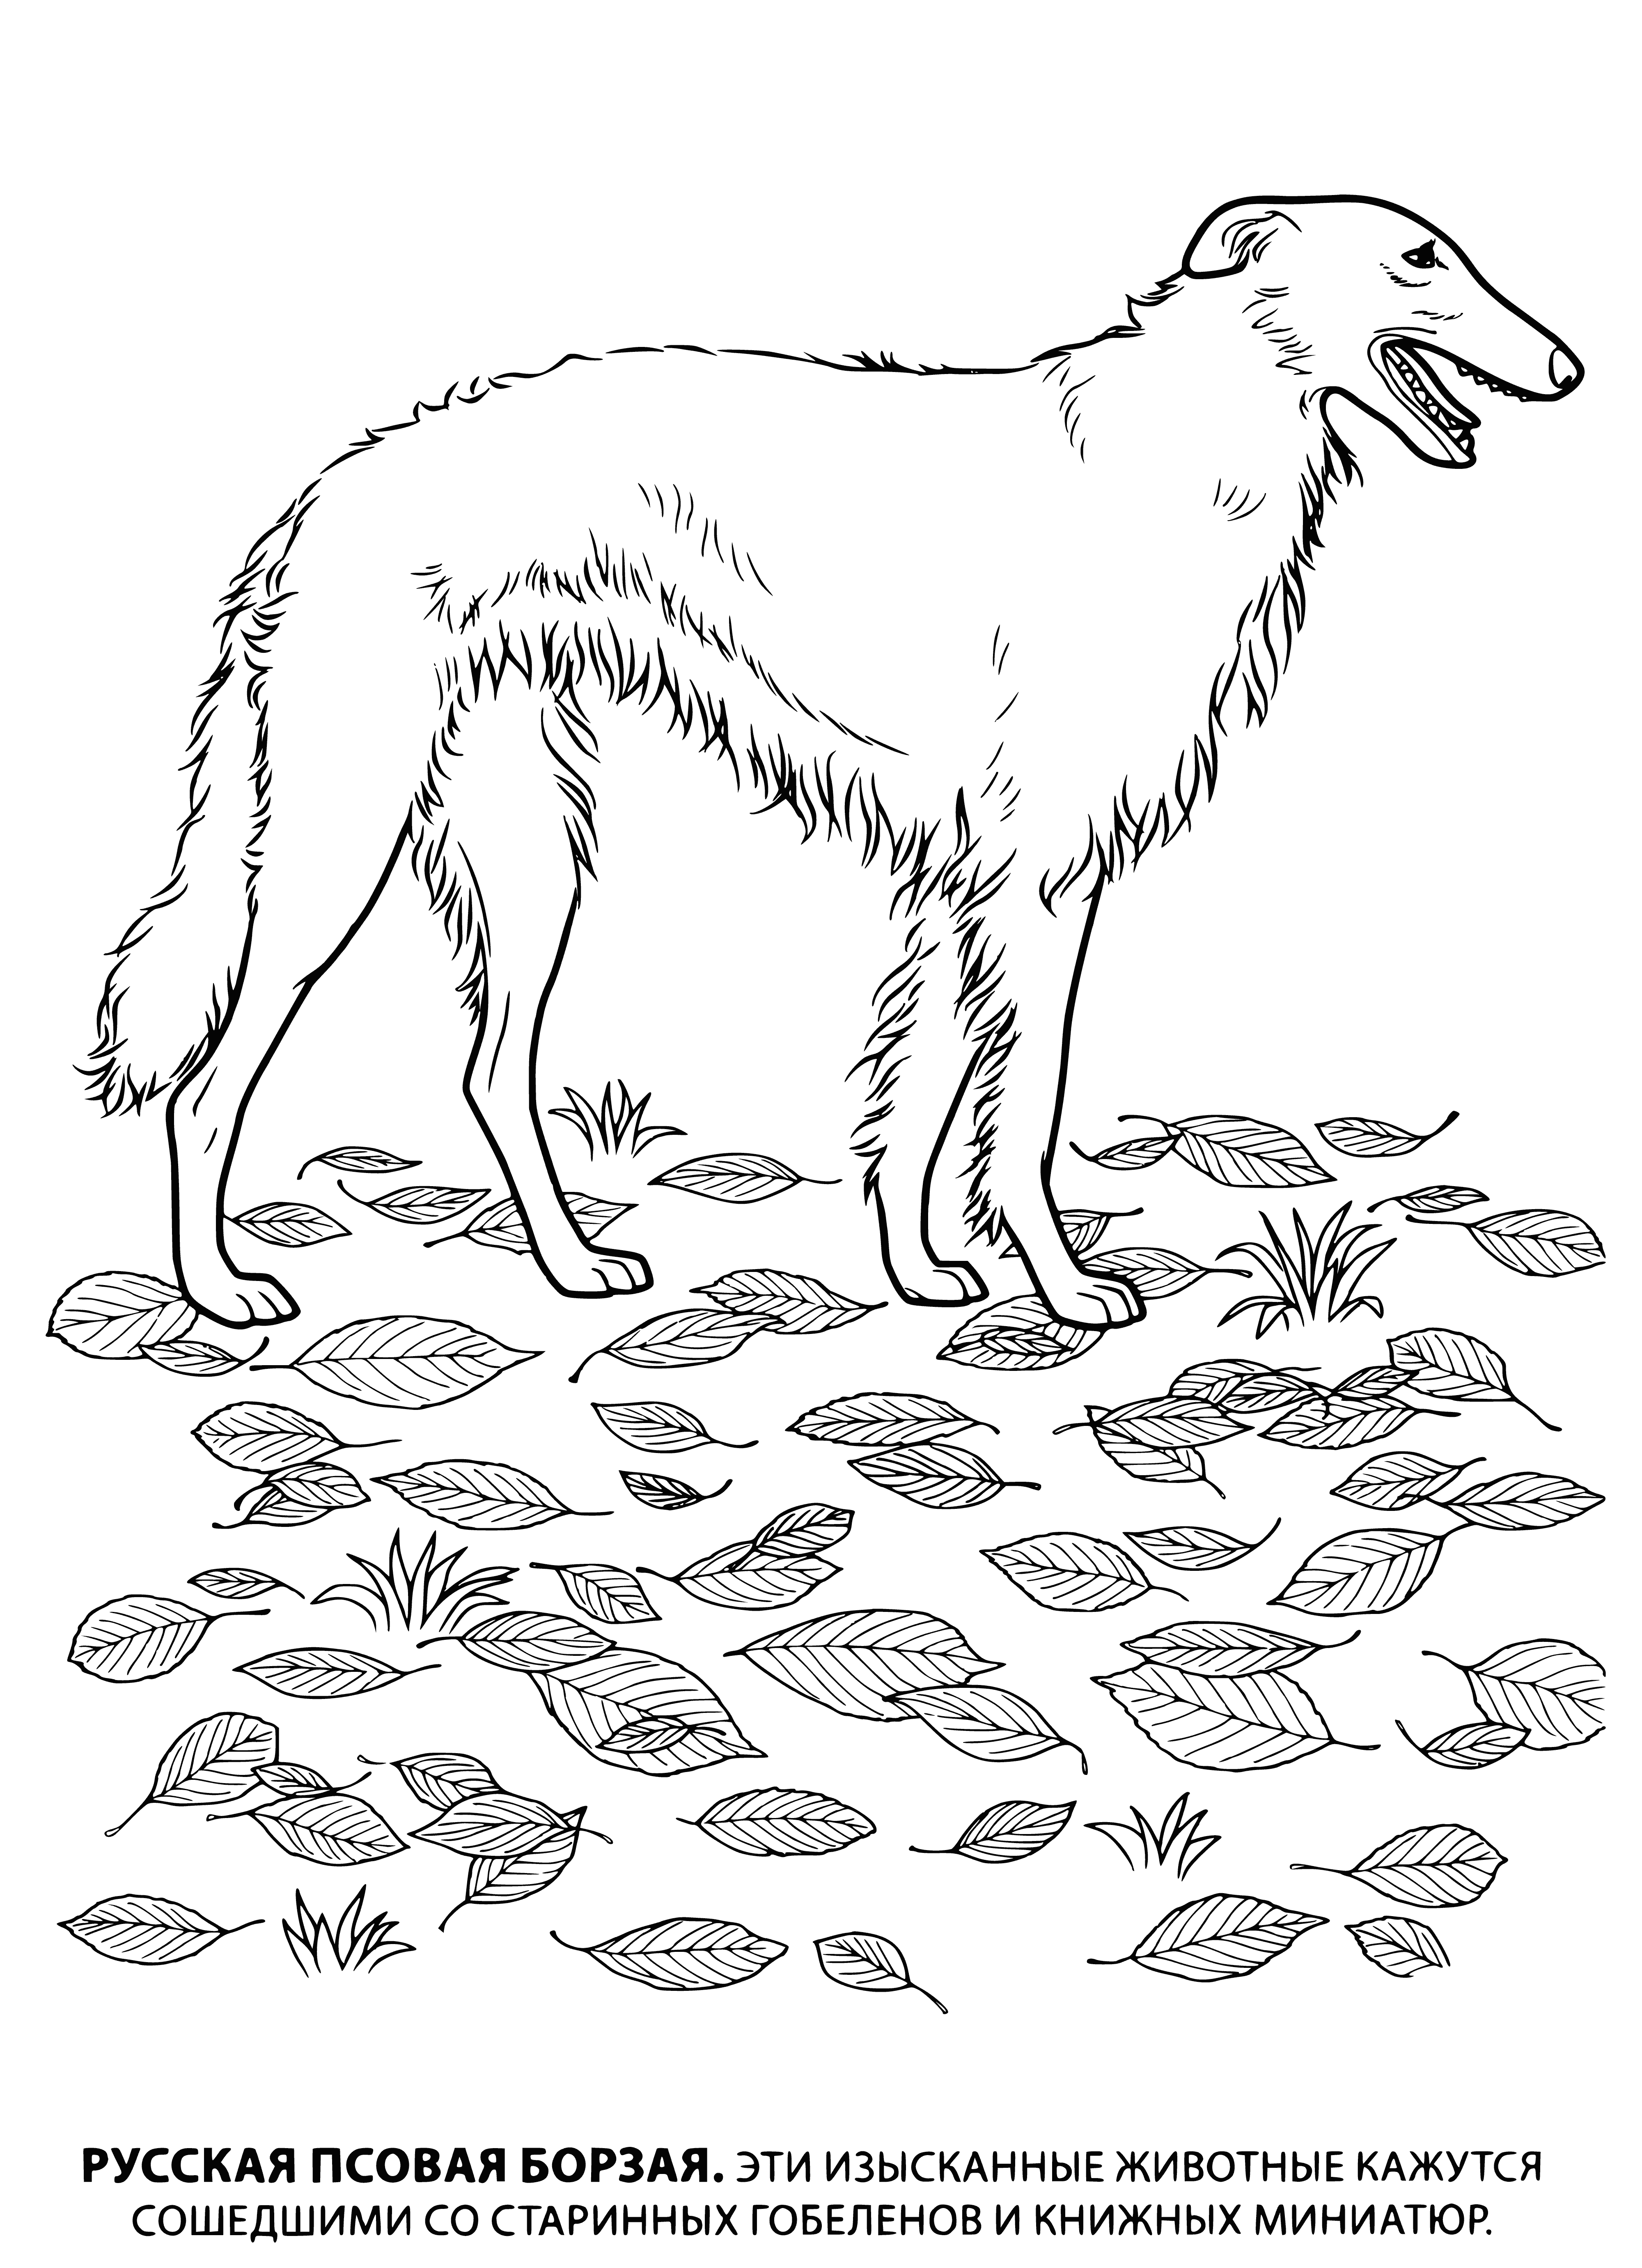 coloring page: Russian-hound sighthound: lean, muscular dog with long, narrow head; pointy ears; thin tail; short, smooth coat; fast, agile runner; used for hunting.